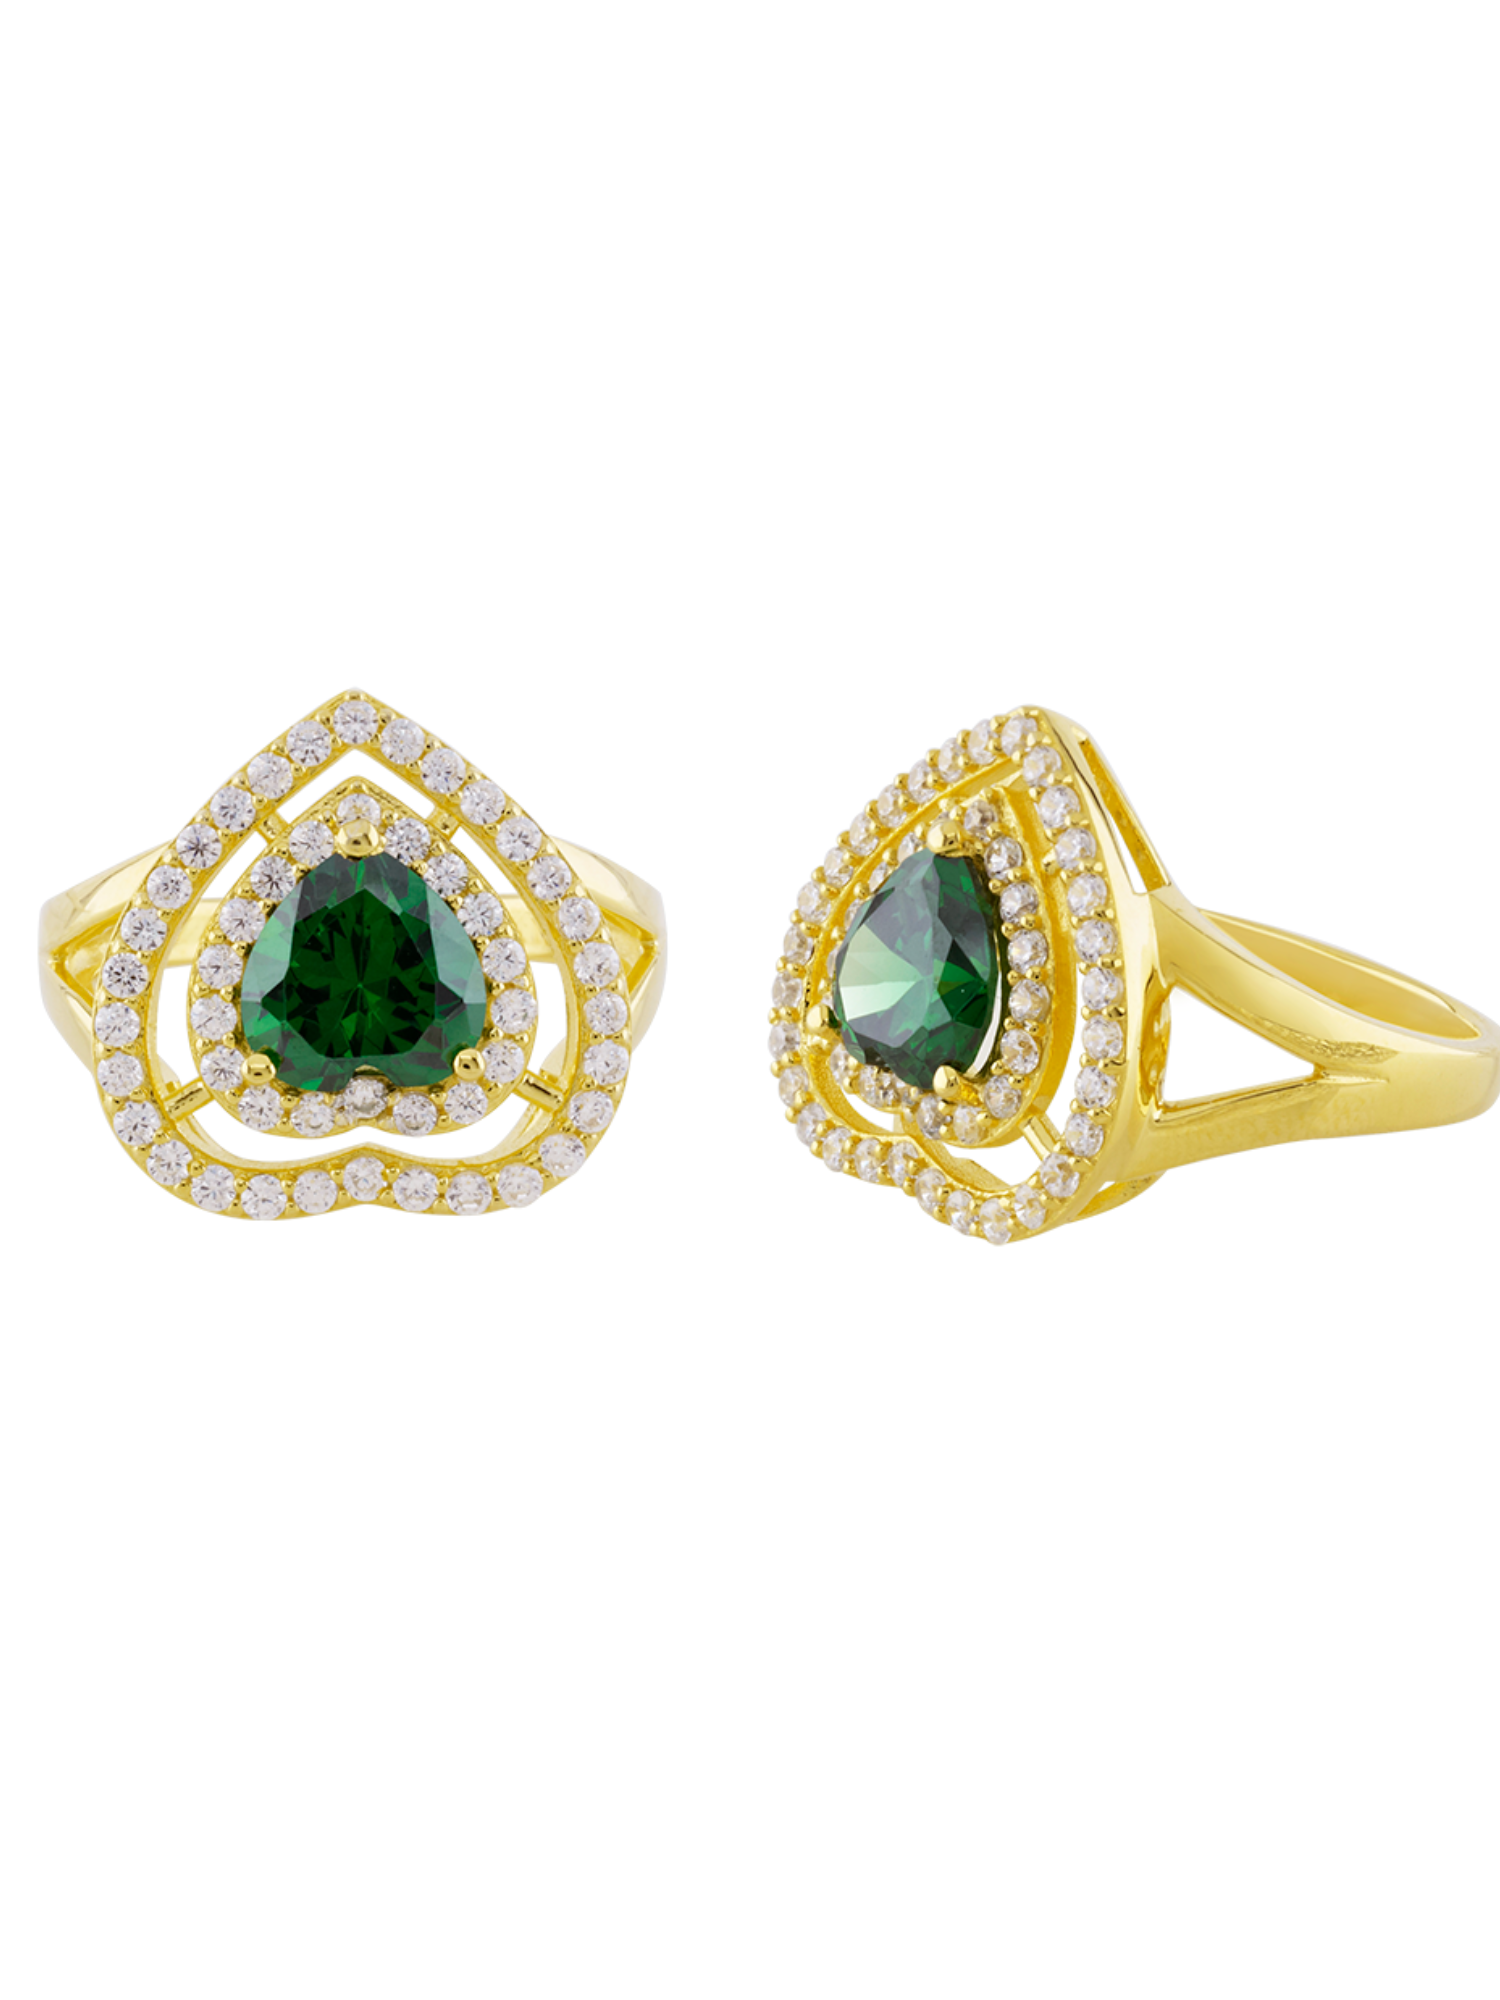 GOLD PLATED EMERALD HEART RING IN SILVER-5